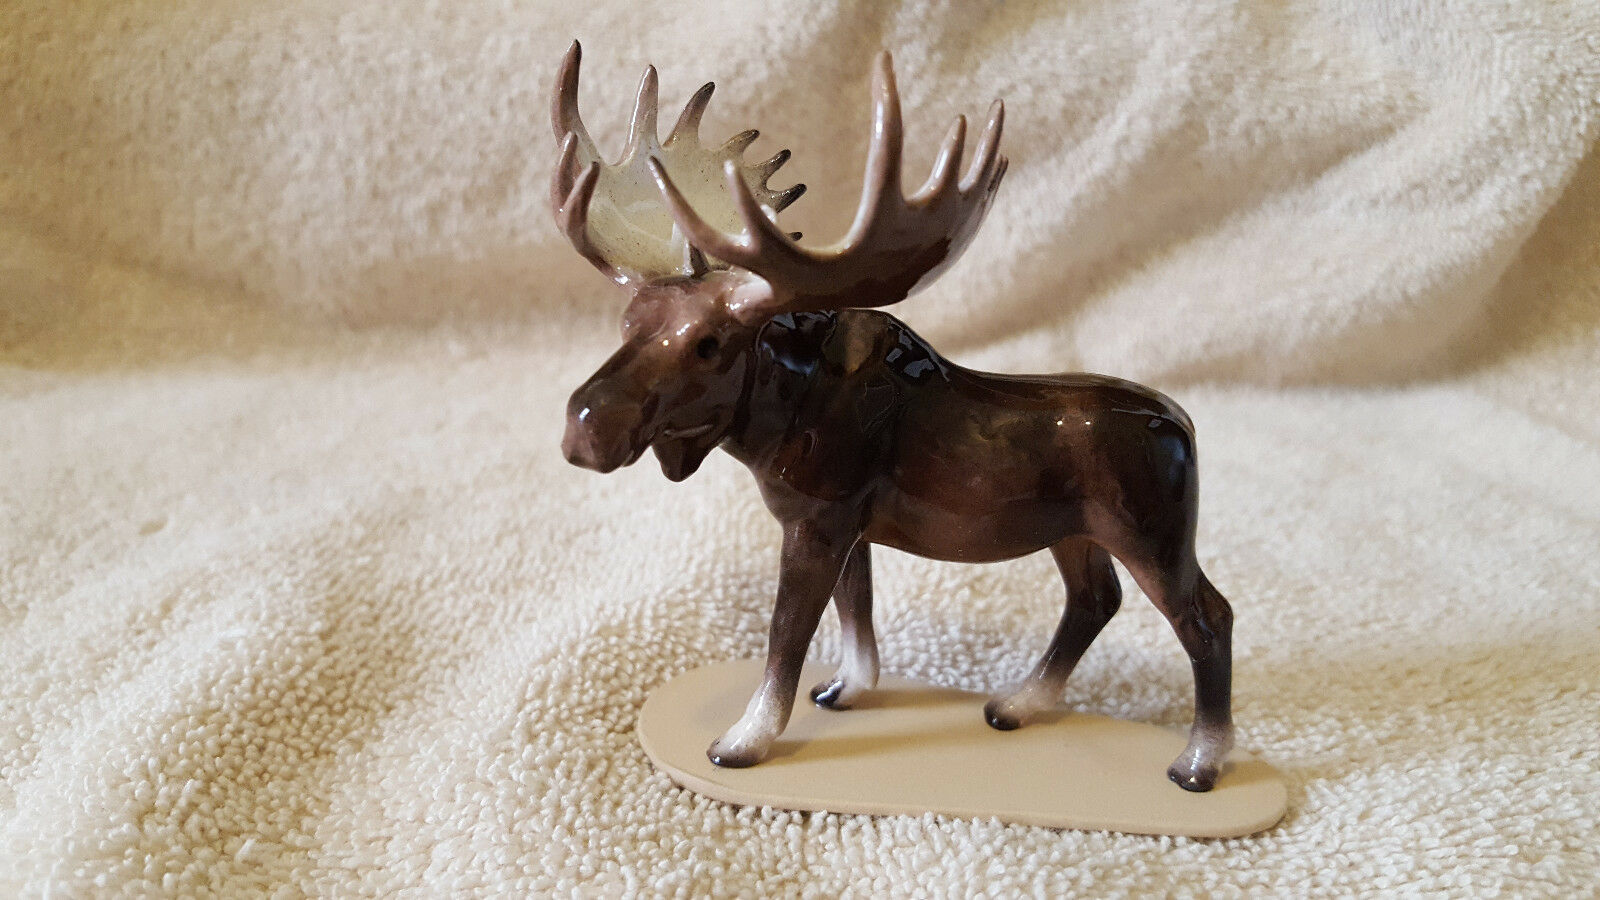 Hagen Renaker Moose Figurine Miniature Collect New Free Shipping 03137